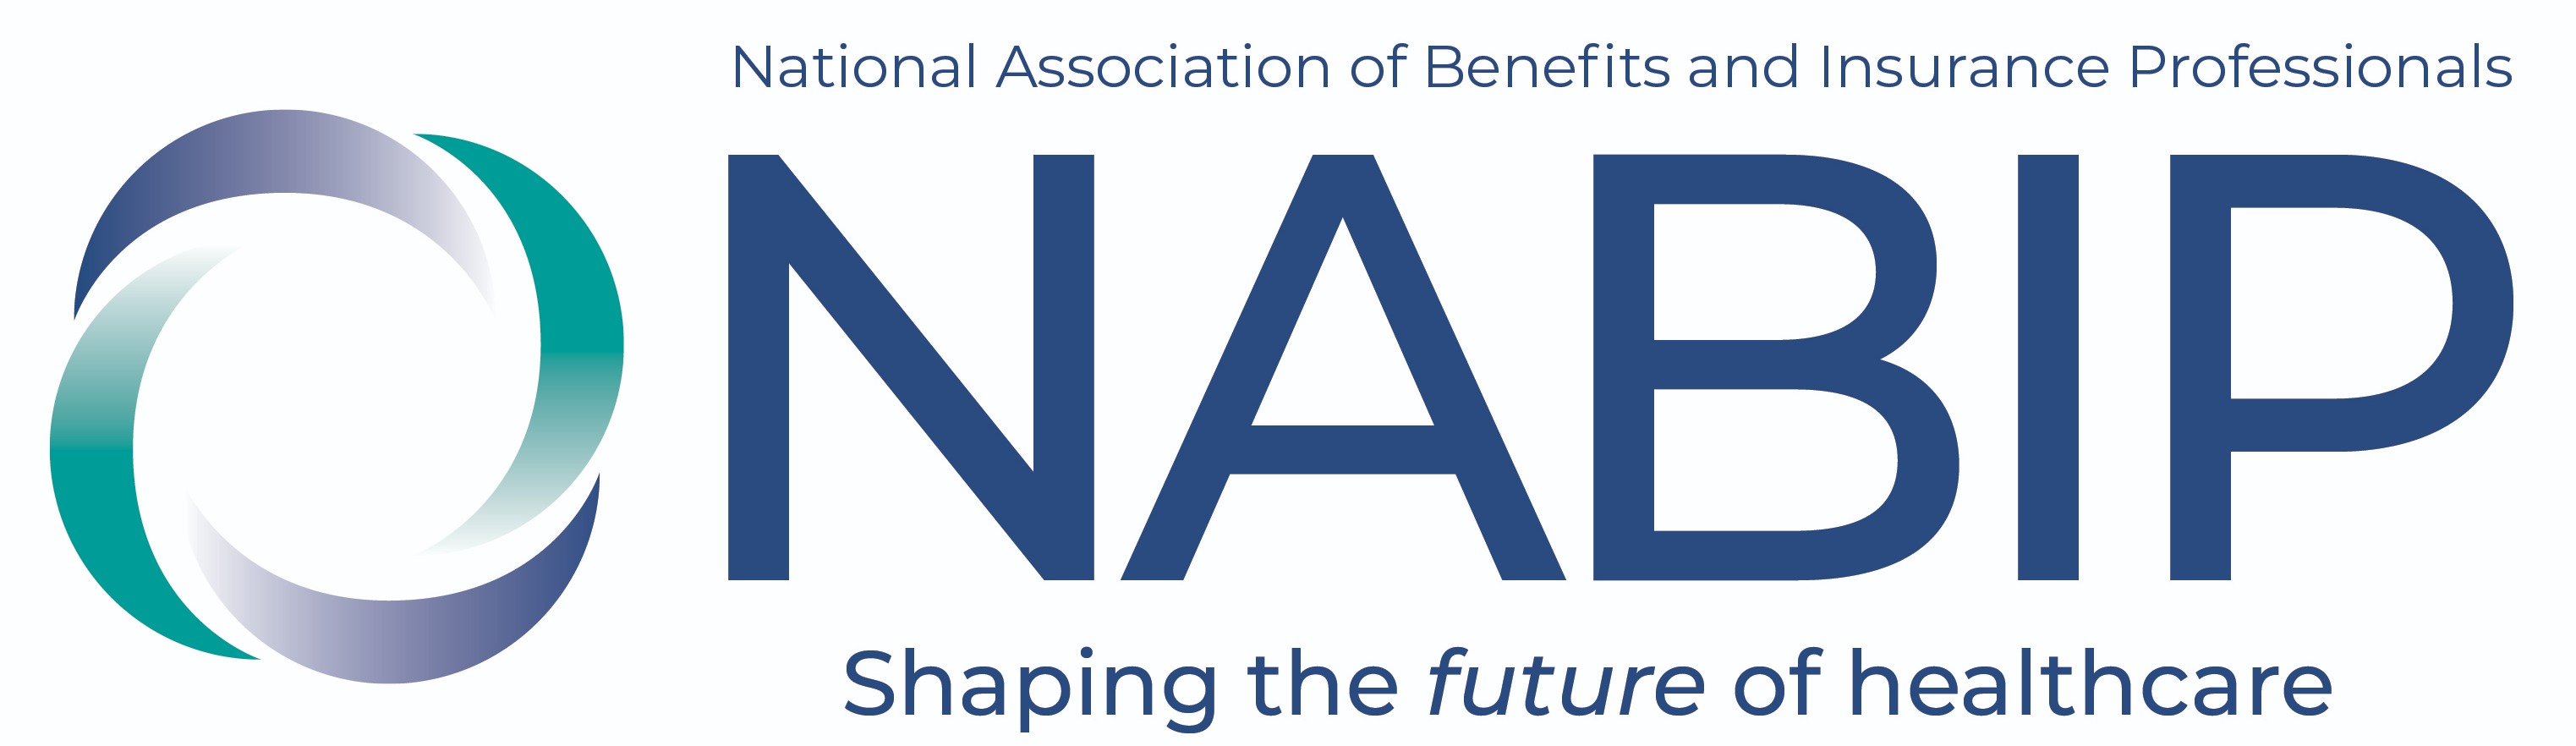 National Association of Benefits and Insurance Professionals